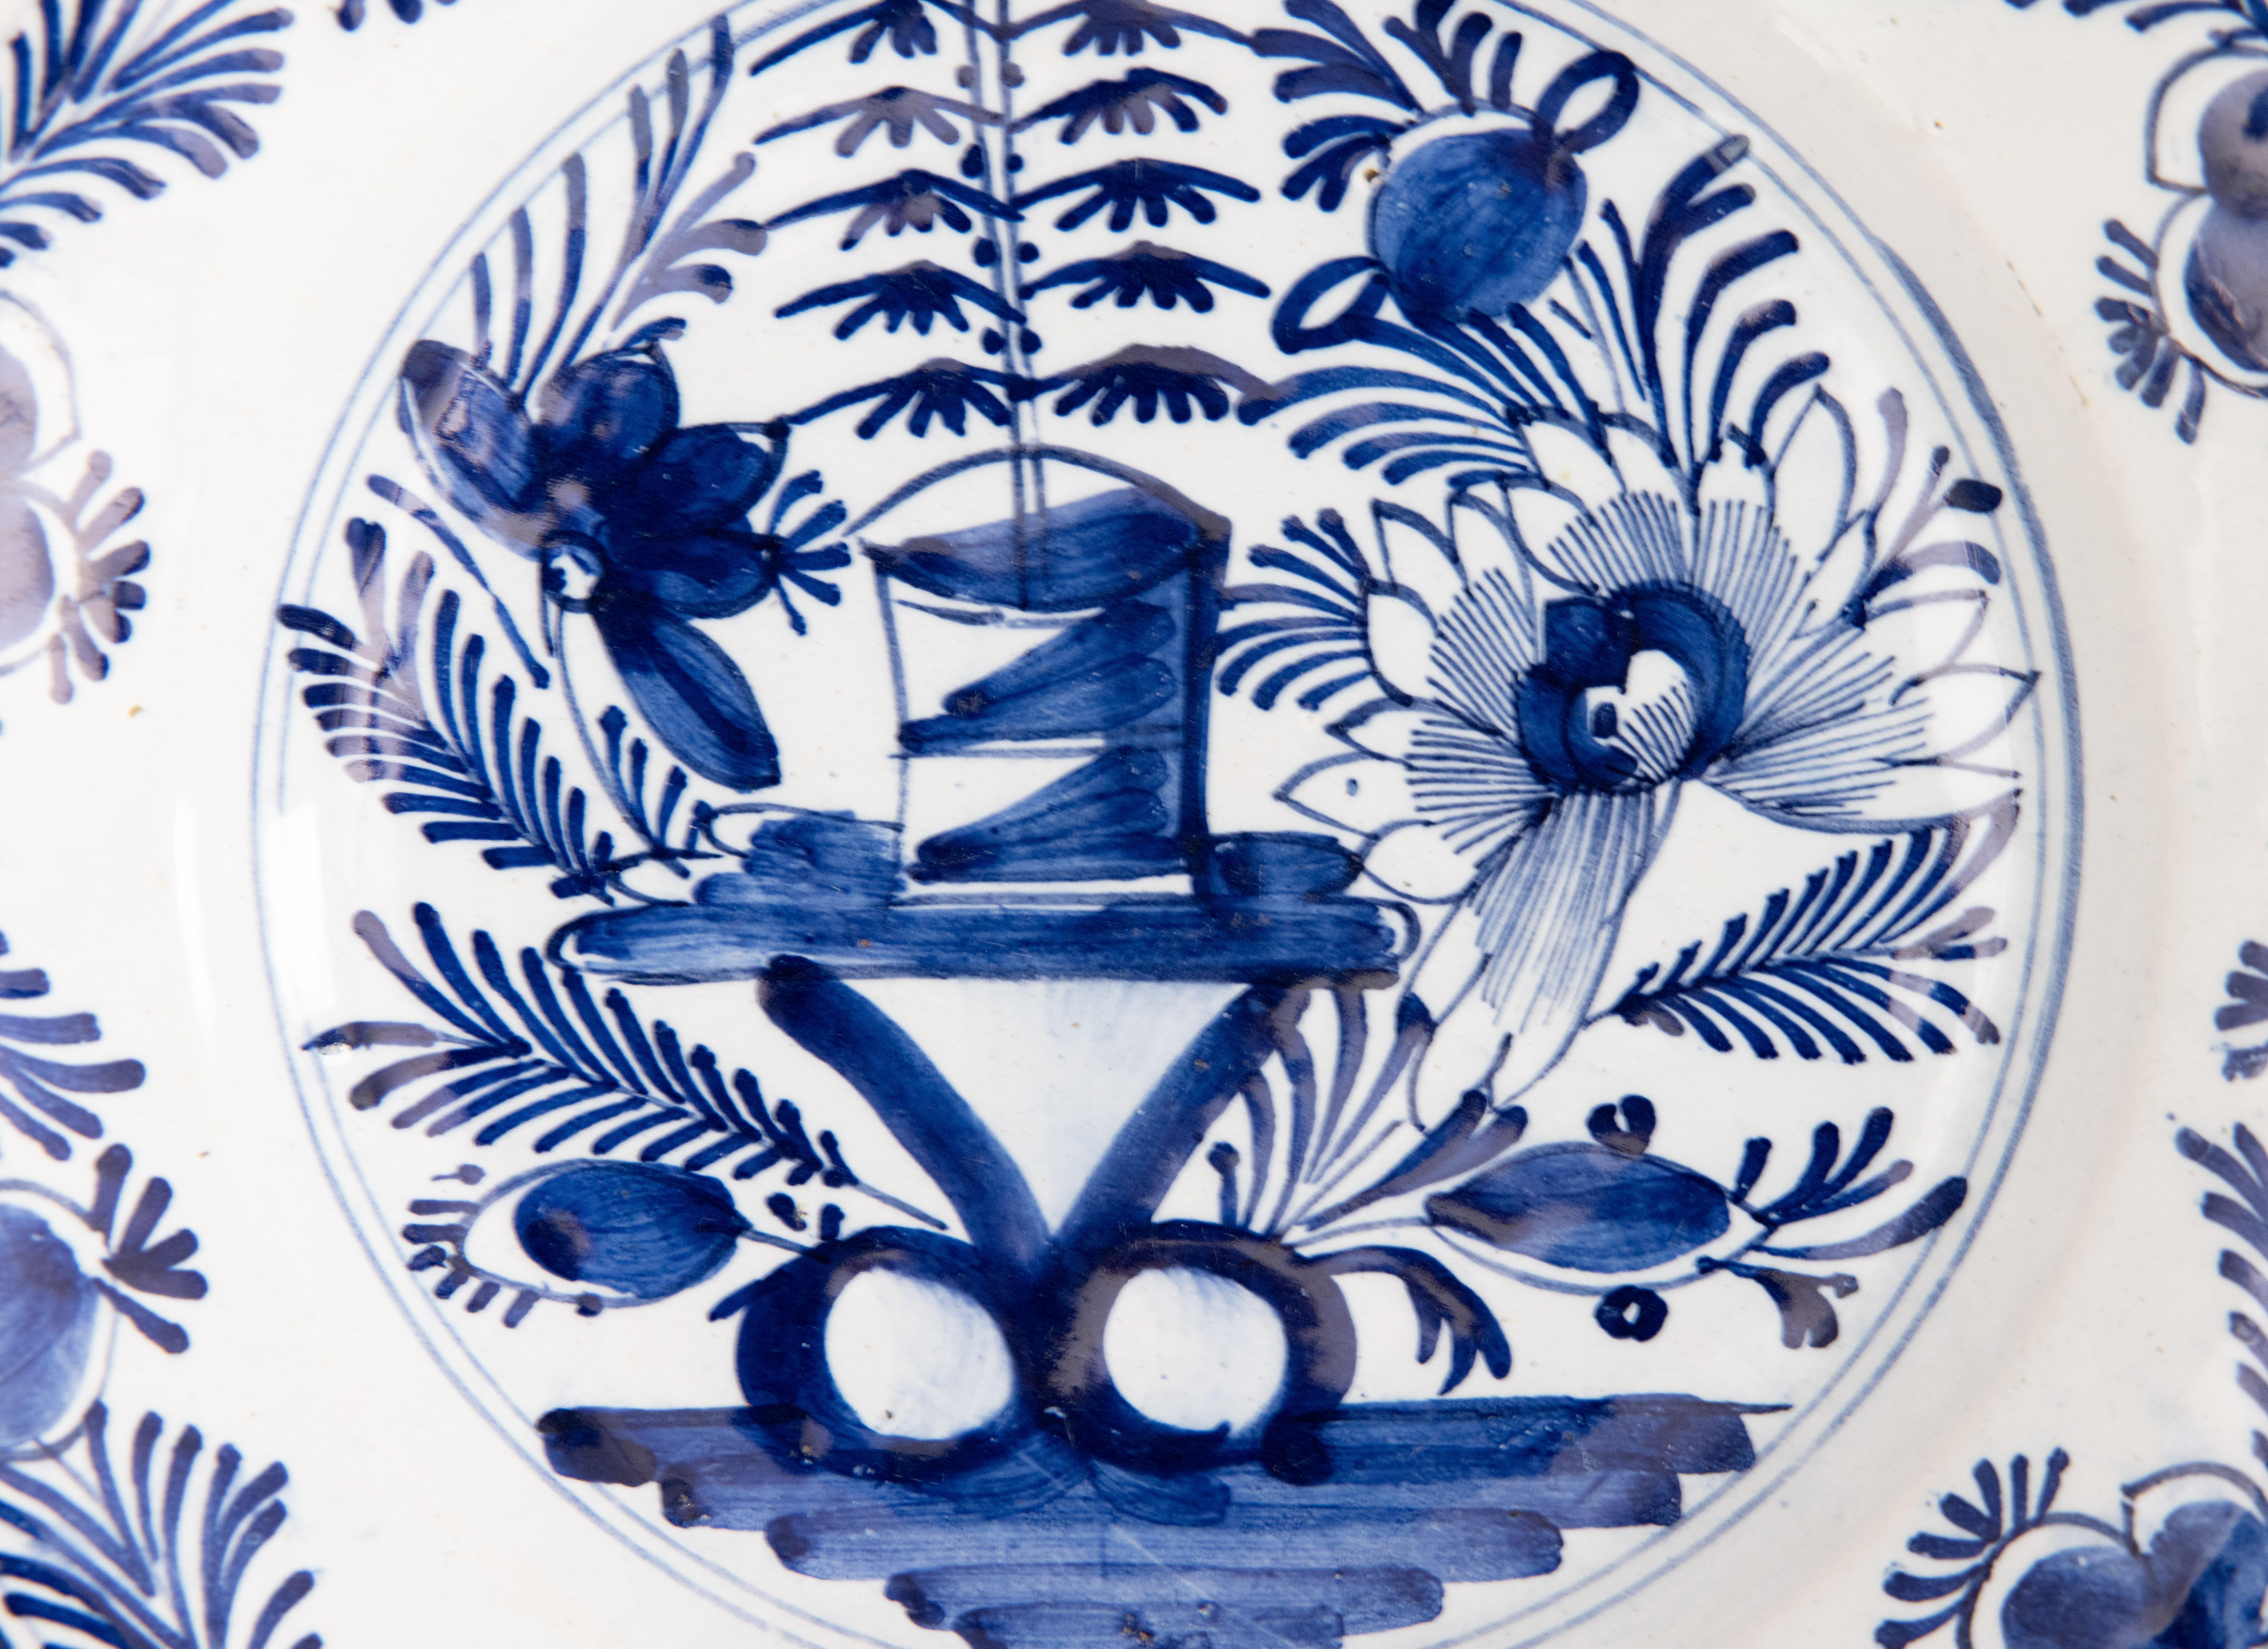 A lovely antique 18th-Century Dutch Delft faience hand painted floral plate in vibrant cobalt blue and white. It would look fabulous displayed on a wall or shelf in any room.

DIMENSIONS
9ʺW × 1.5ʺD × 9ʺH